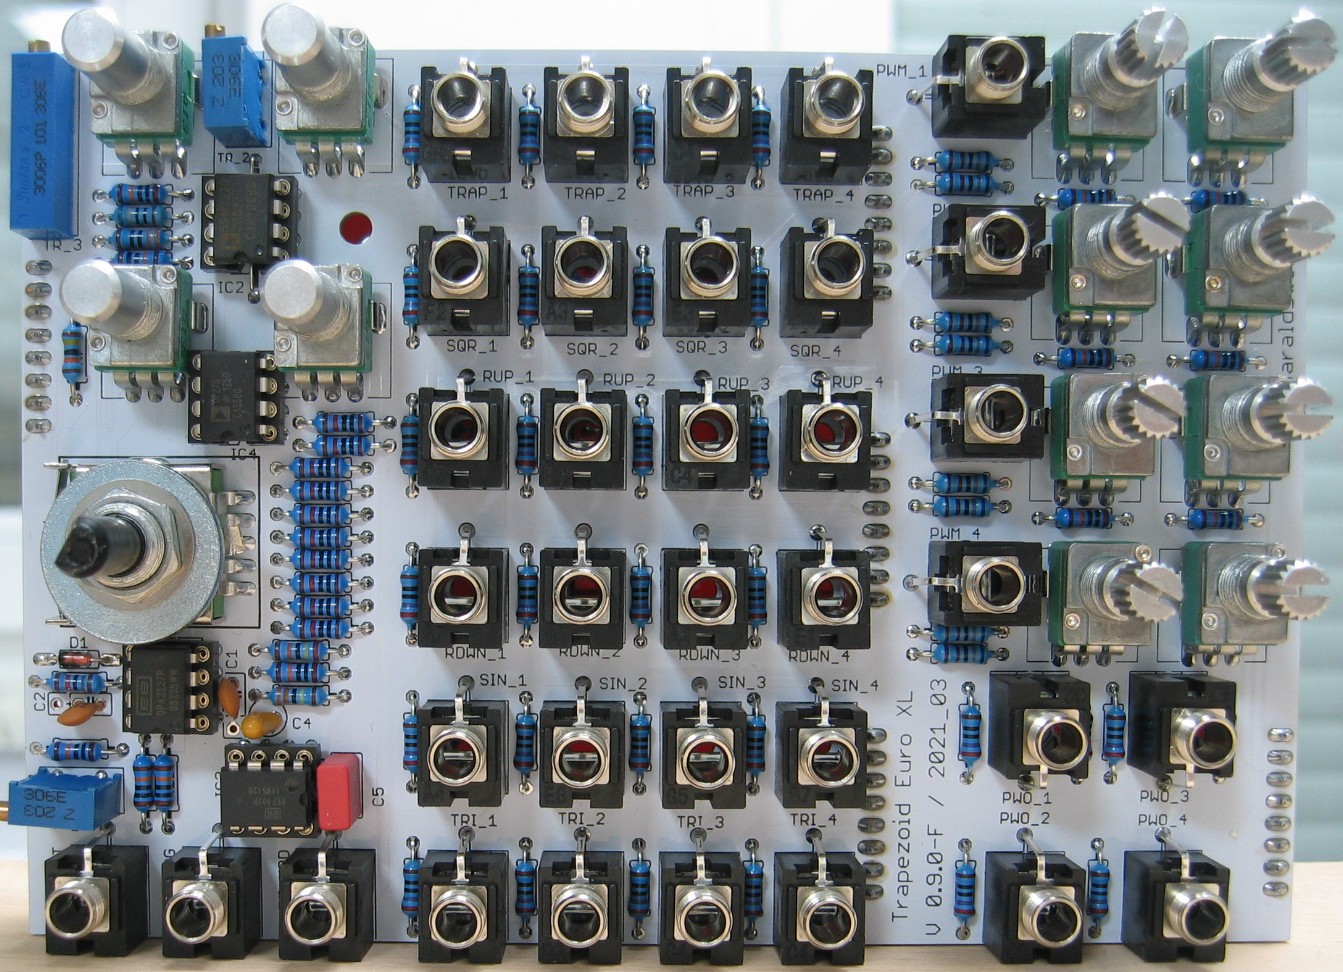 Trapezoid extended VCO populated control PCB